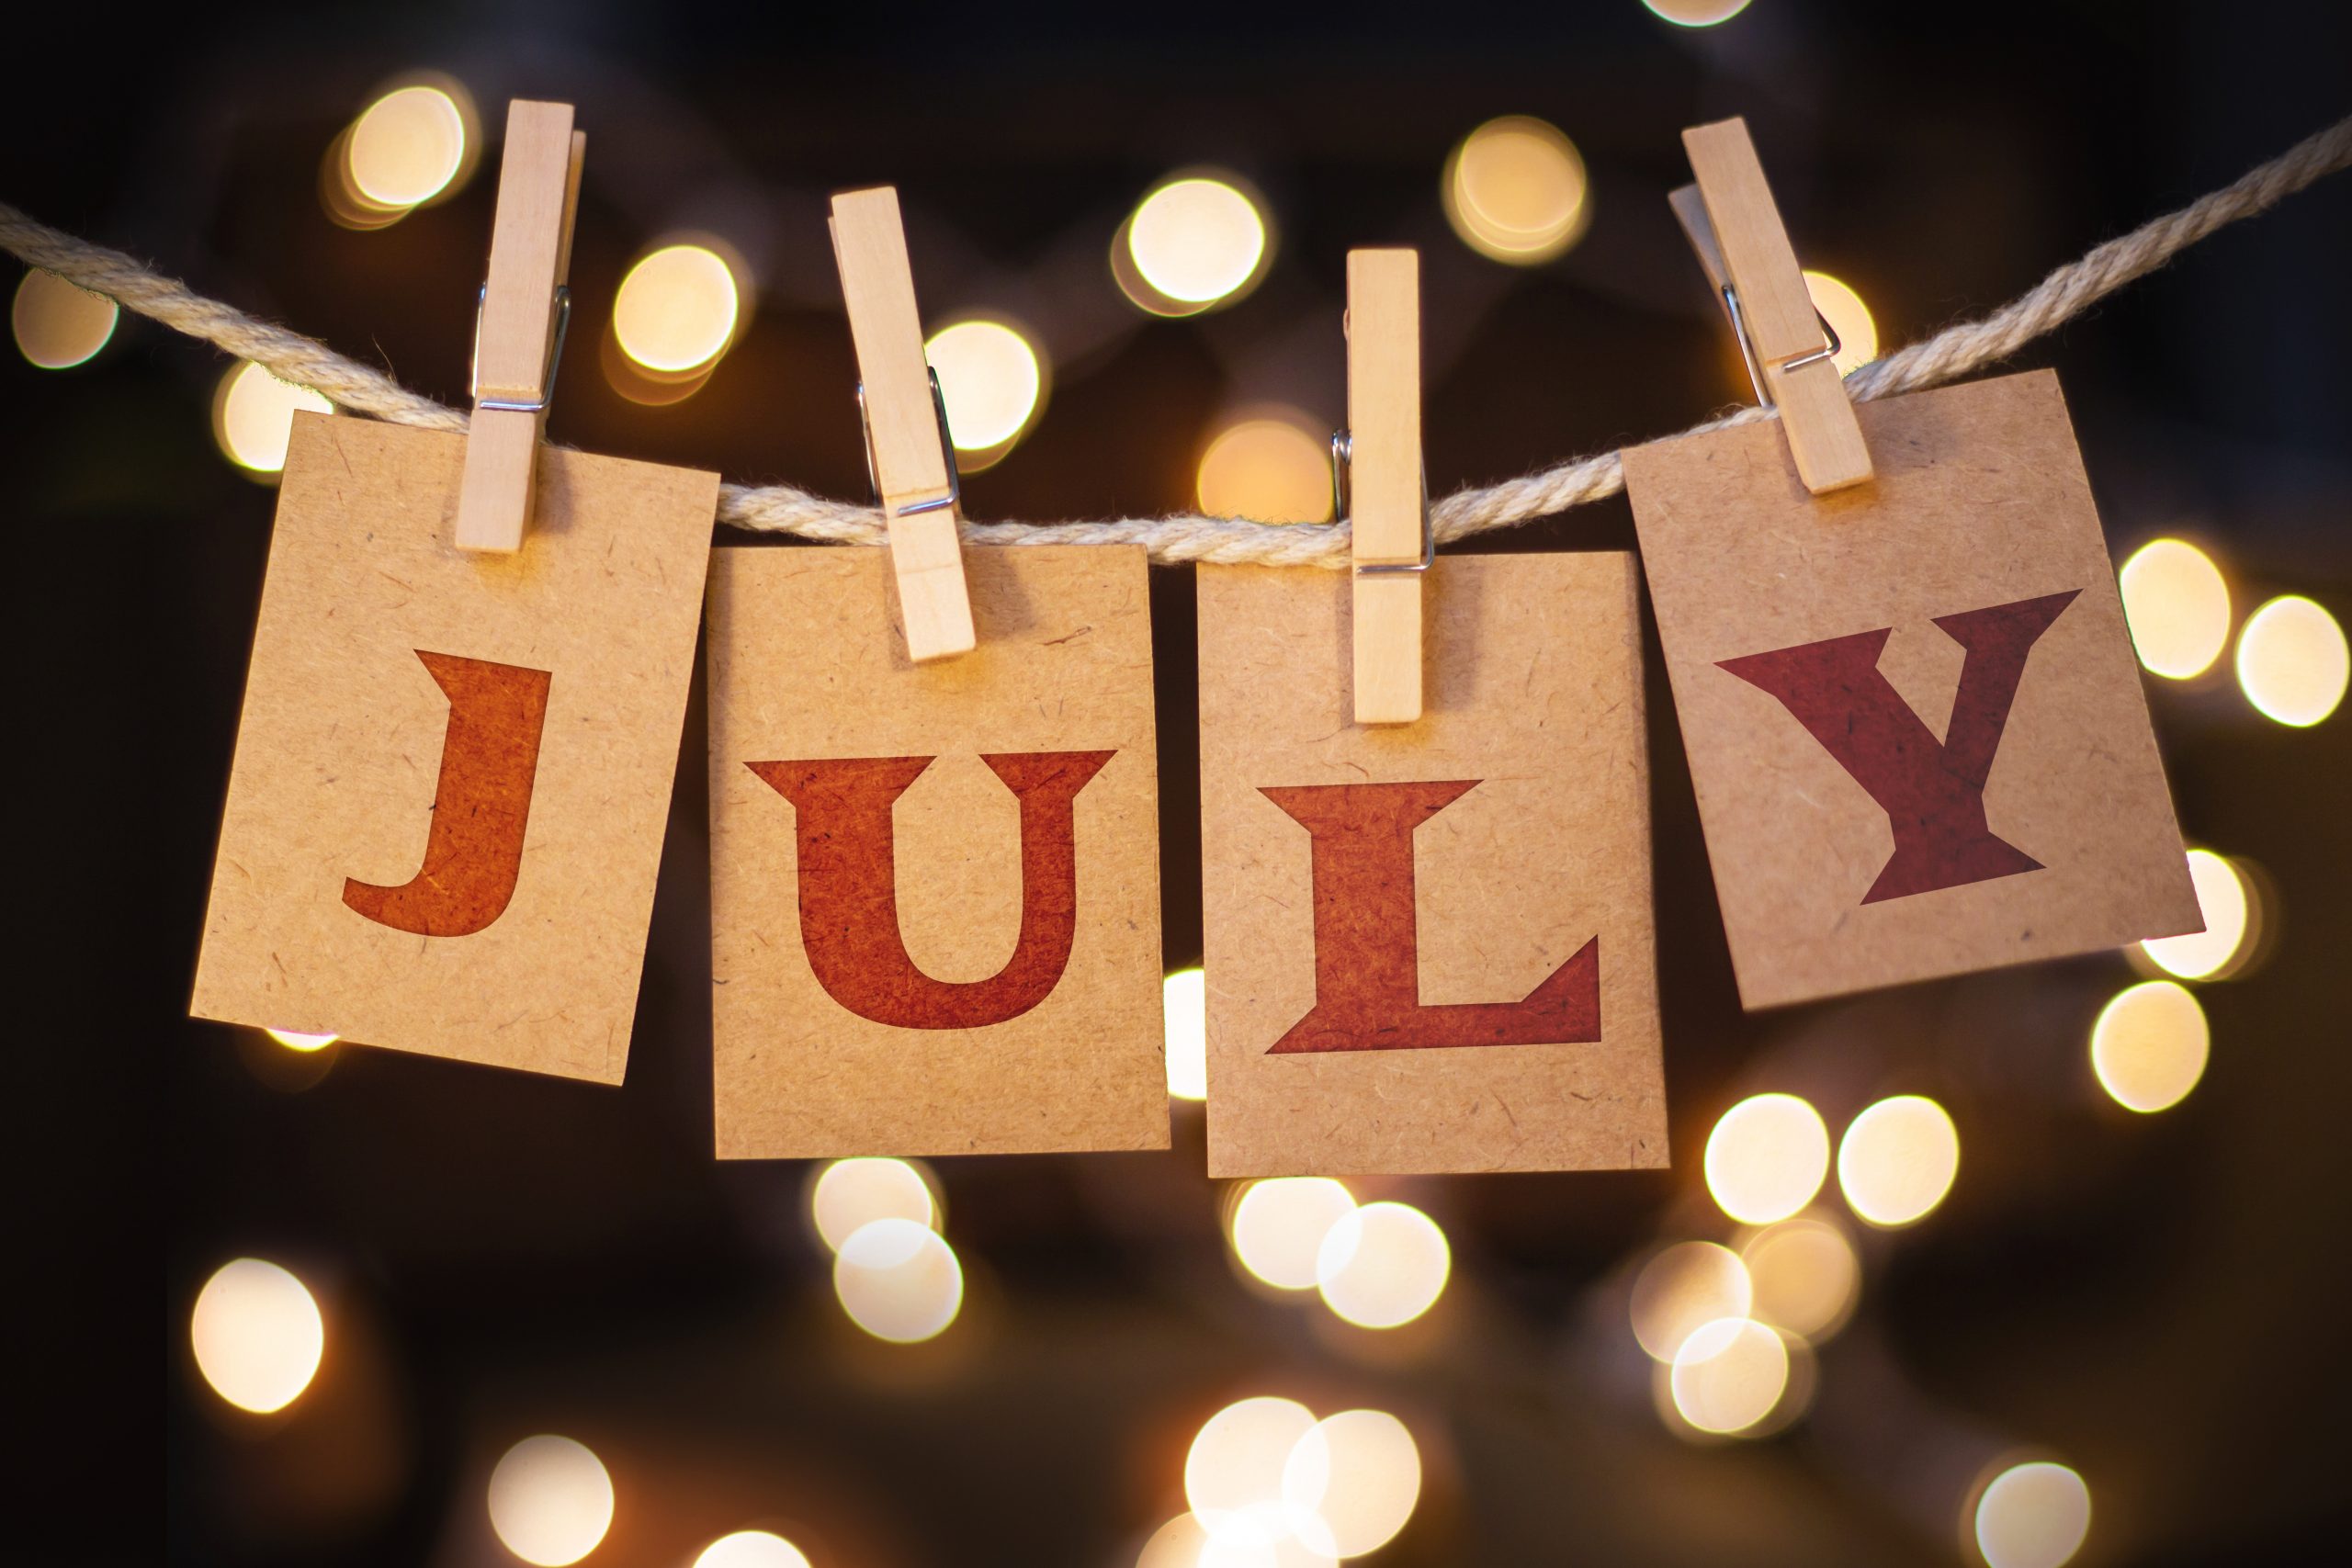 July Events